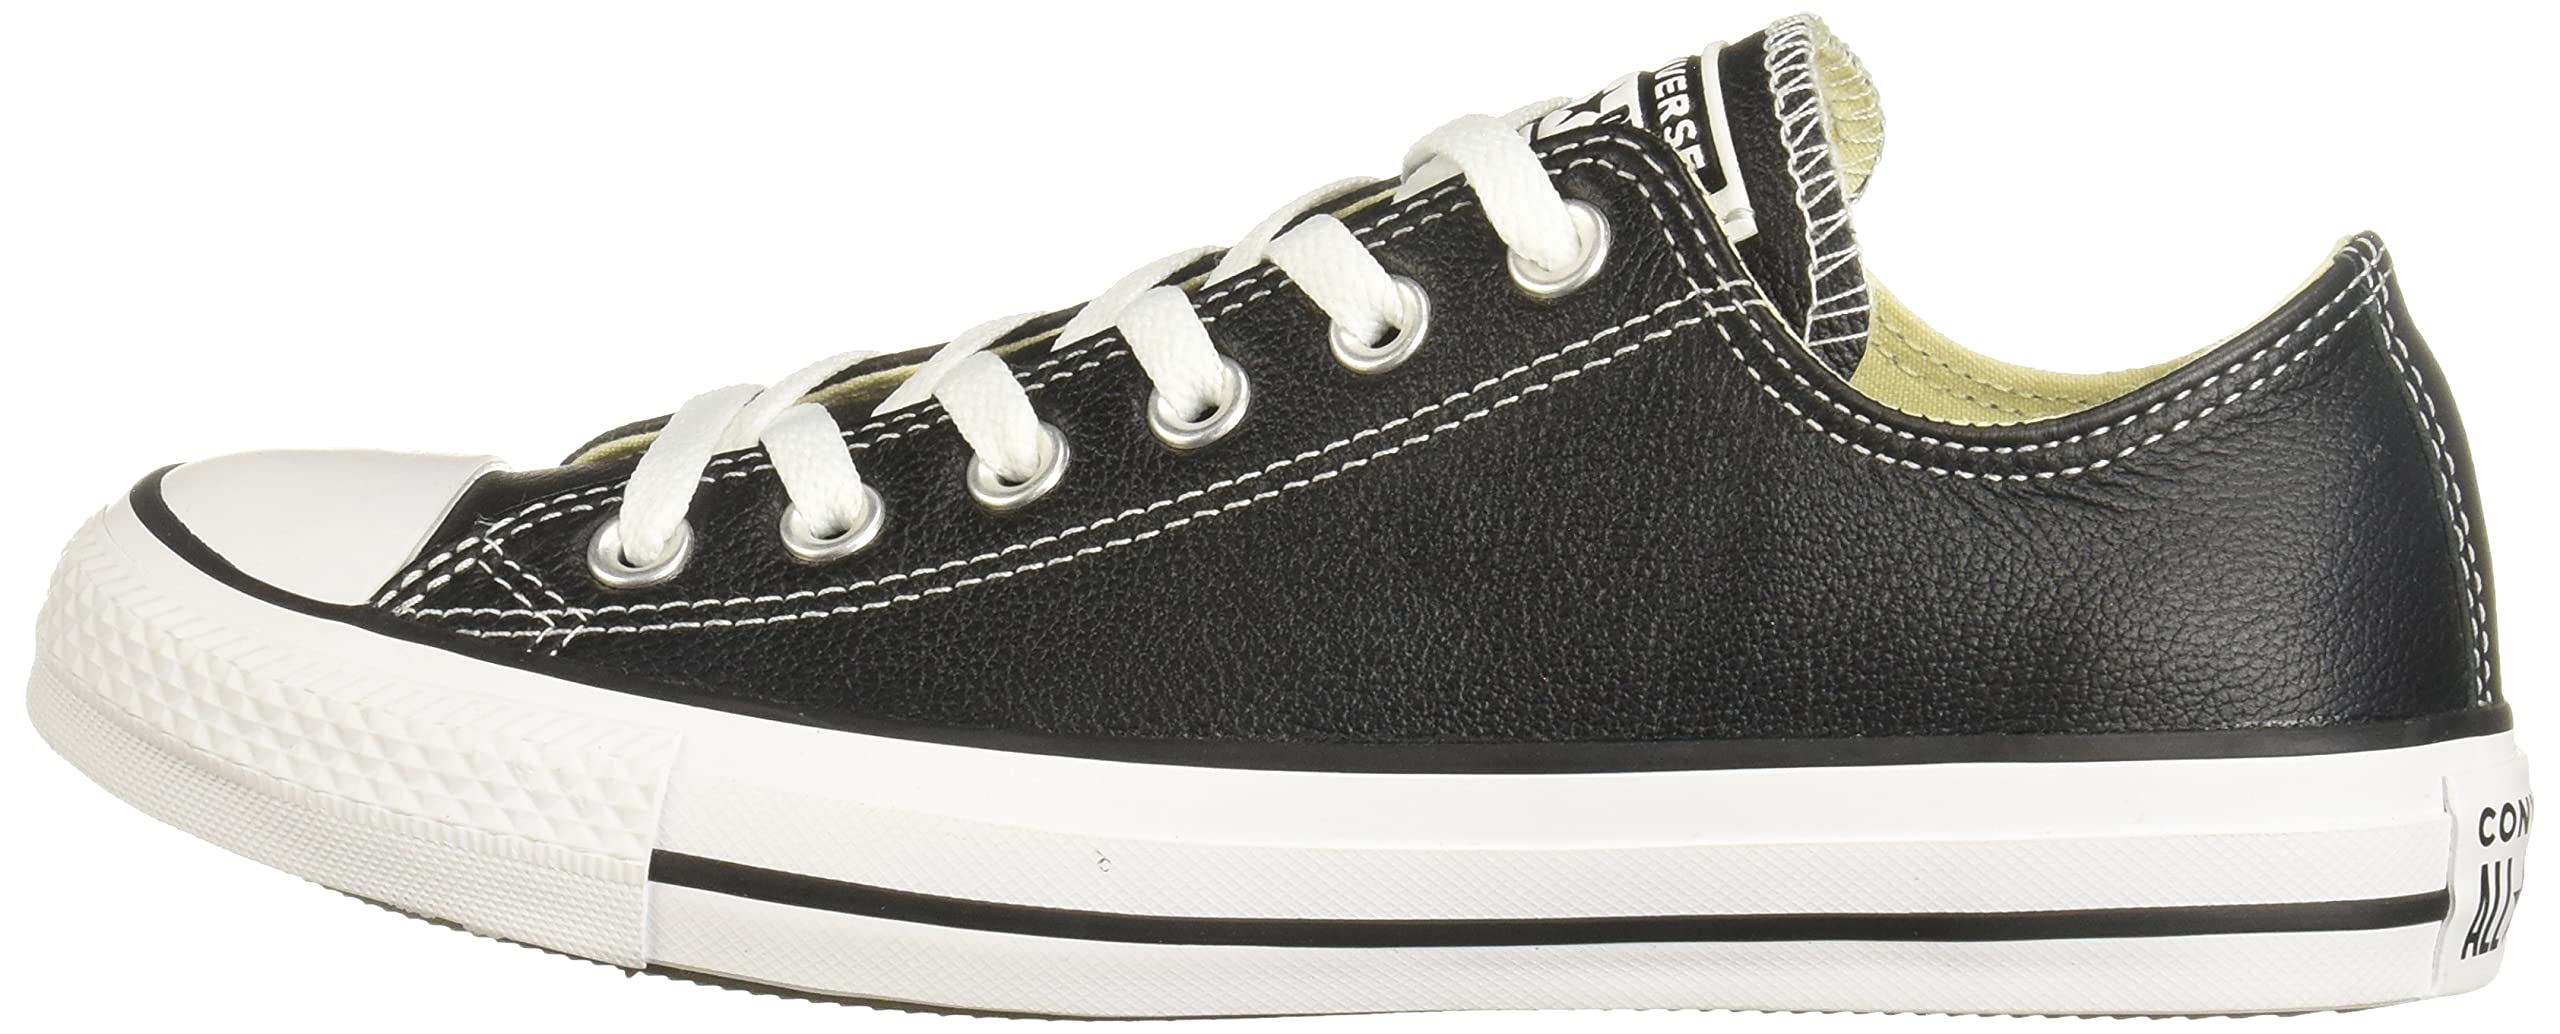 Converse Unisex-Child Infants' Chuck Taylor All Star Low Top Slip on Sneaker